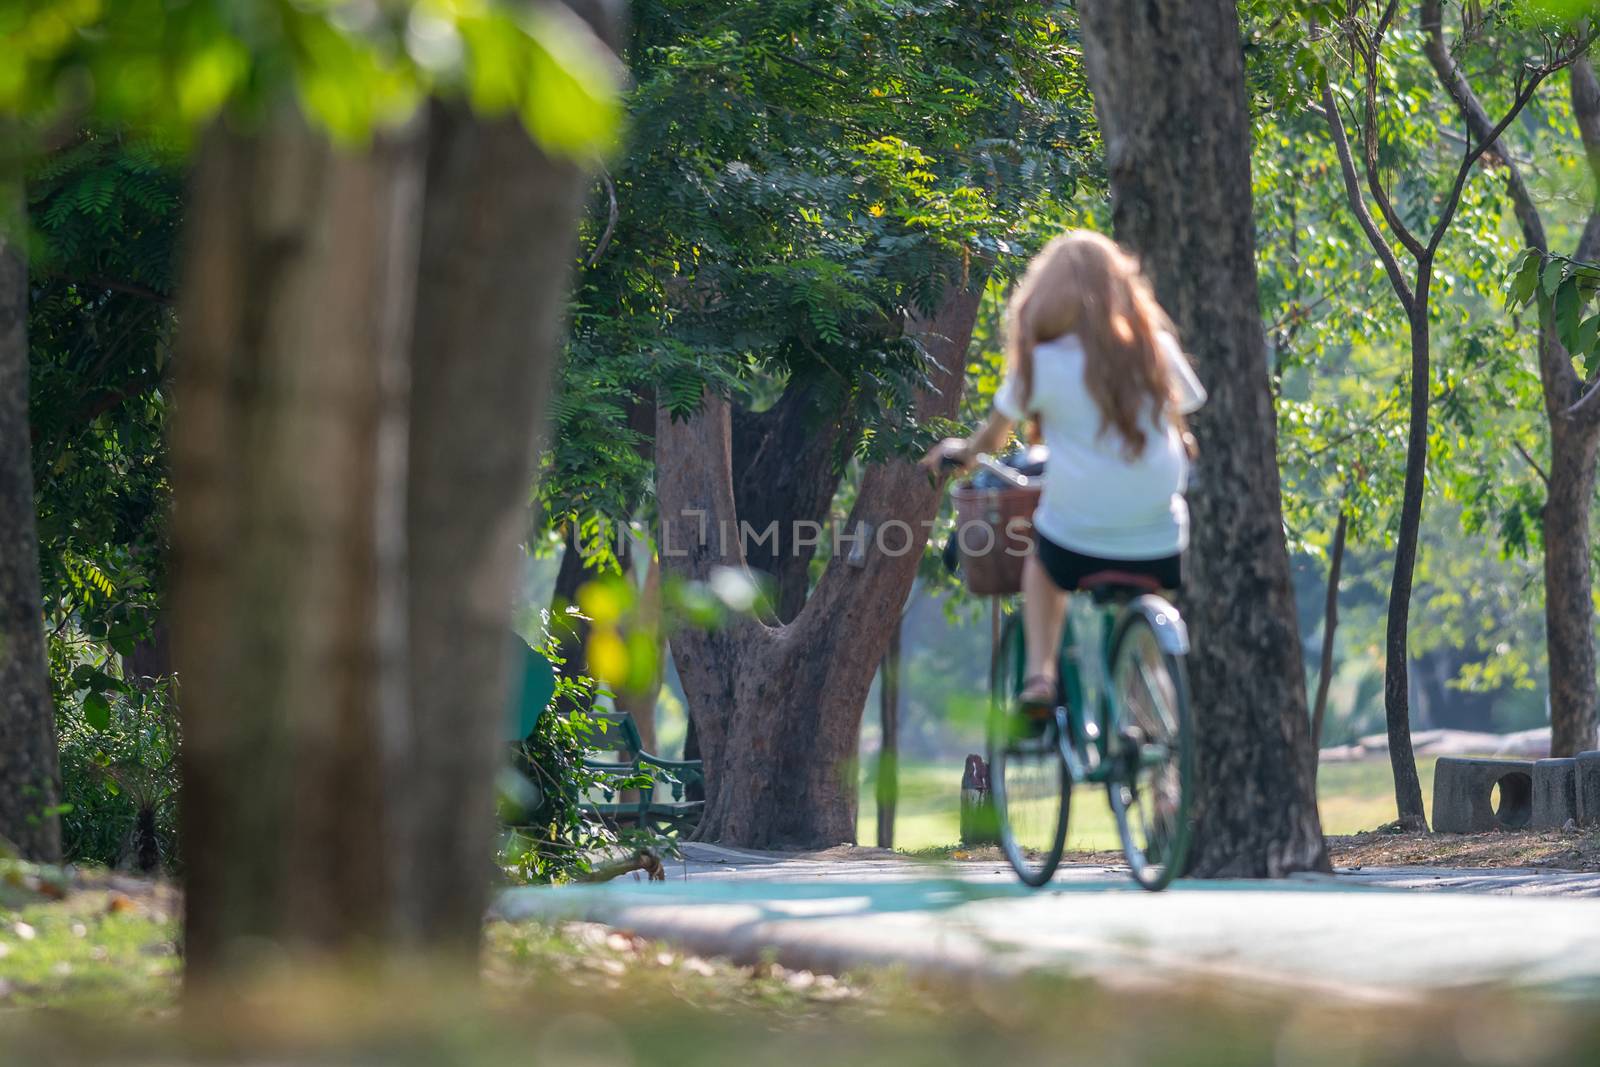 People cycling bicycle in park for exercise by PongMoji